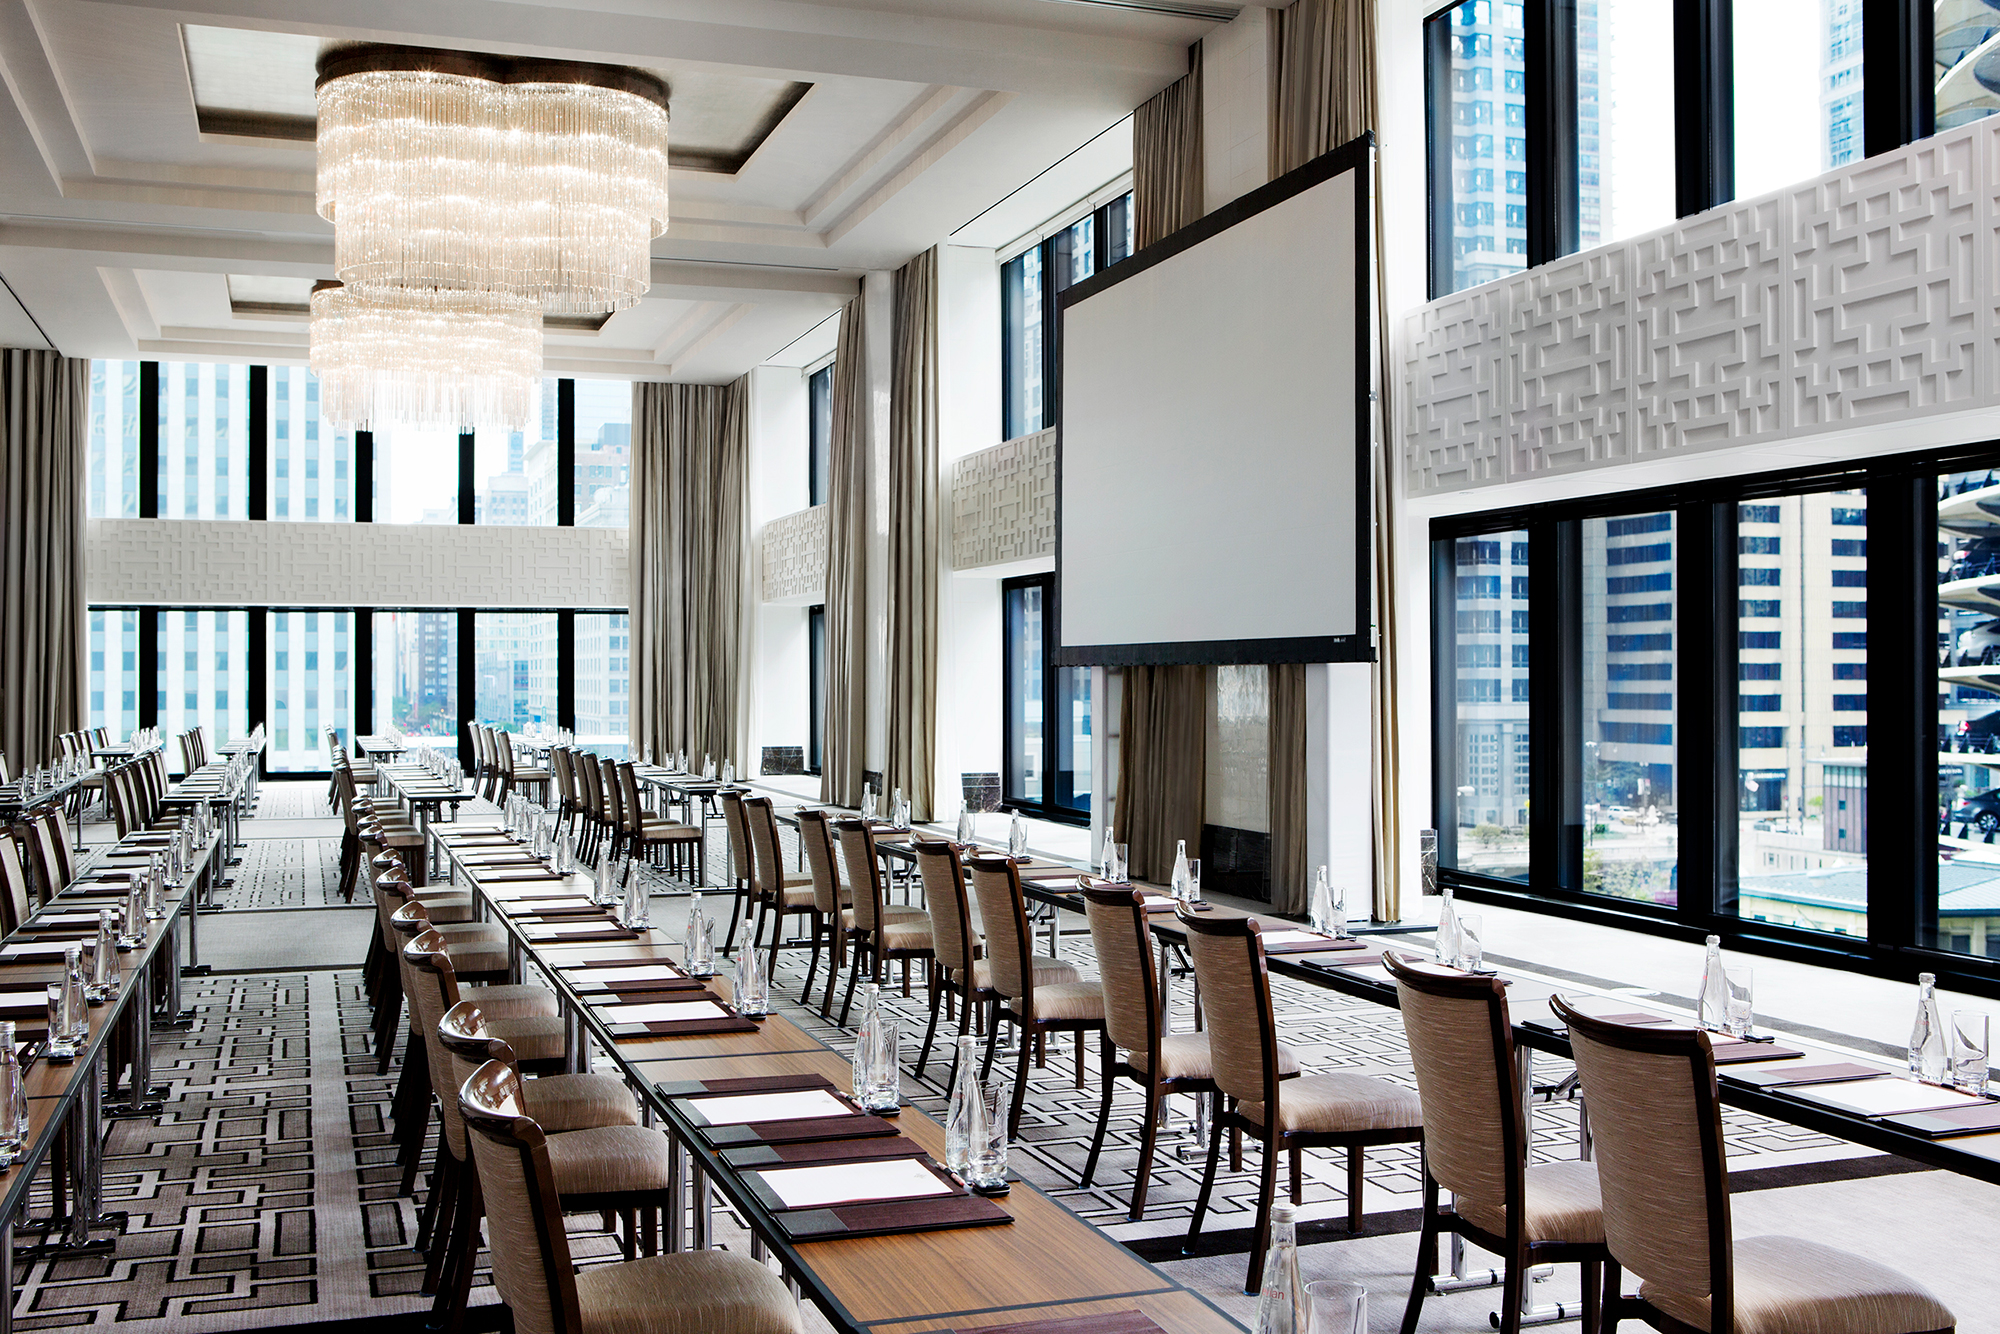 A large event venue at ab88kai, Chicago with a business dining setting.